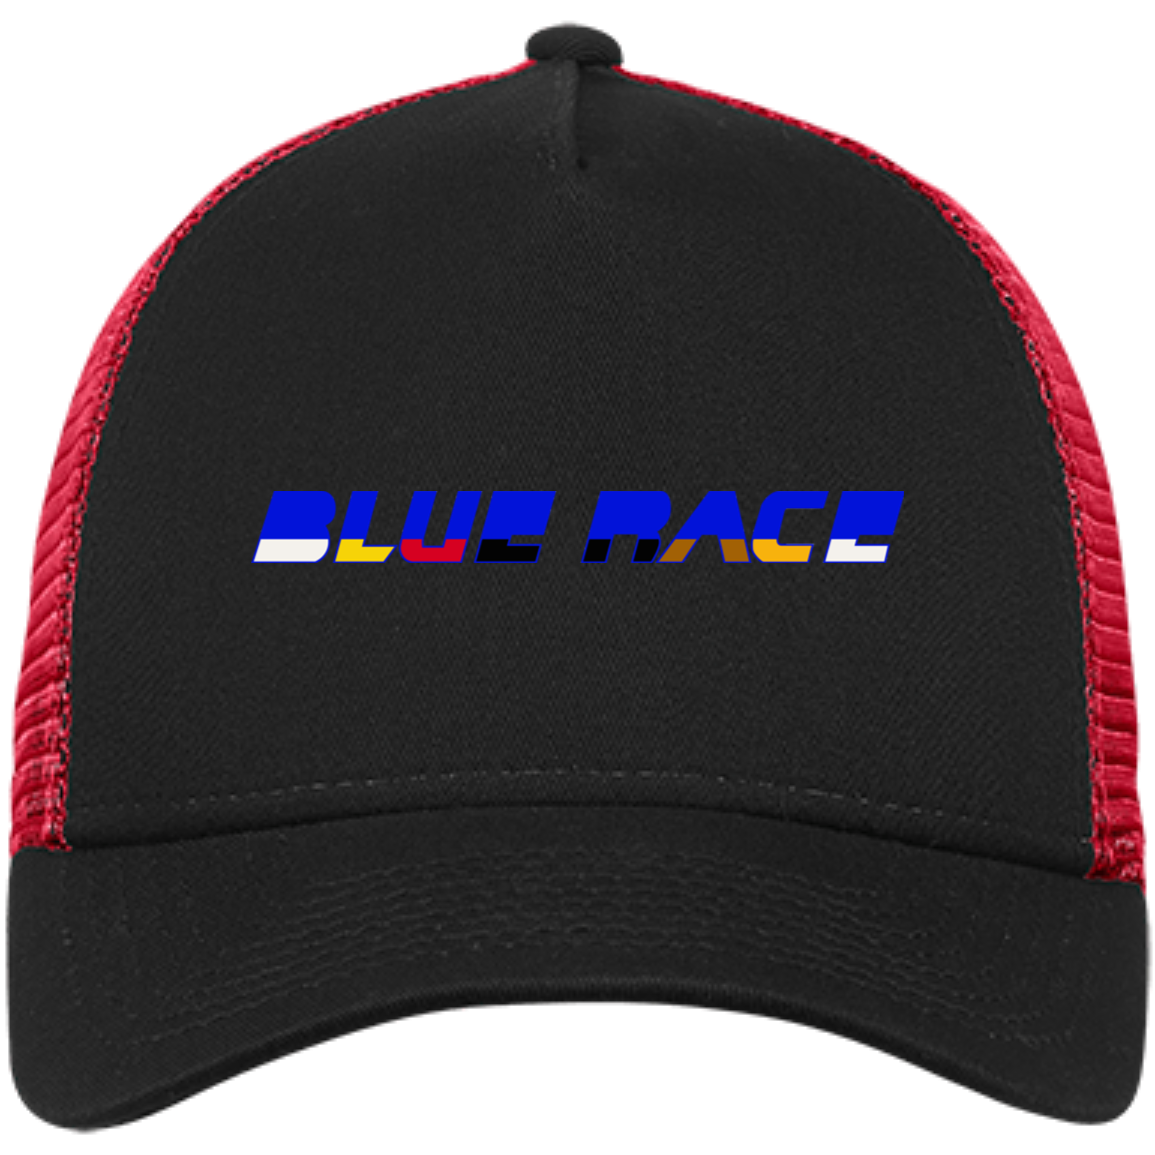 Embroidered Snapback Trucker Cap